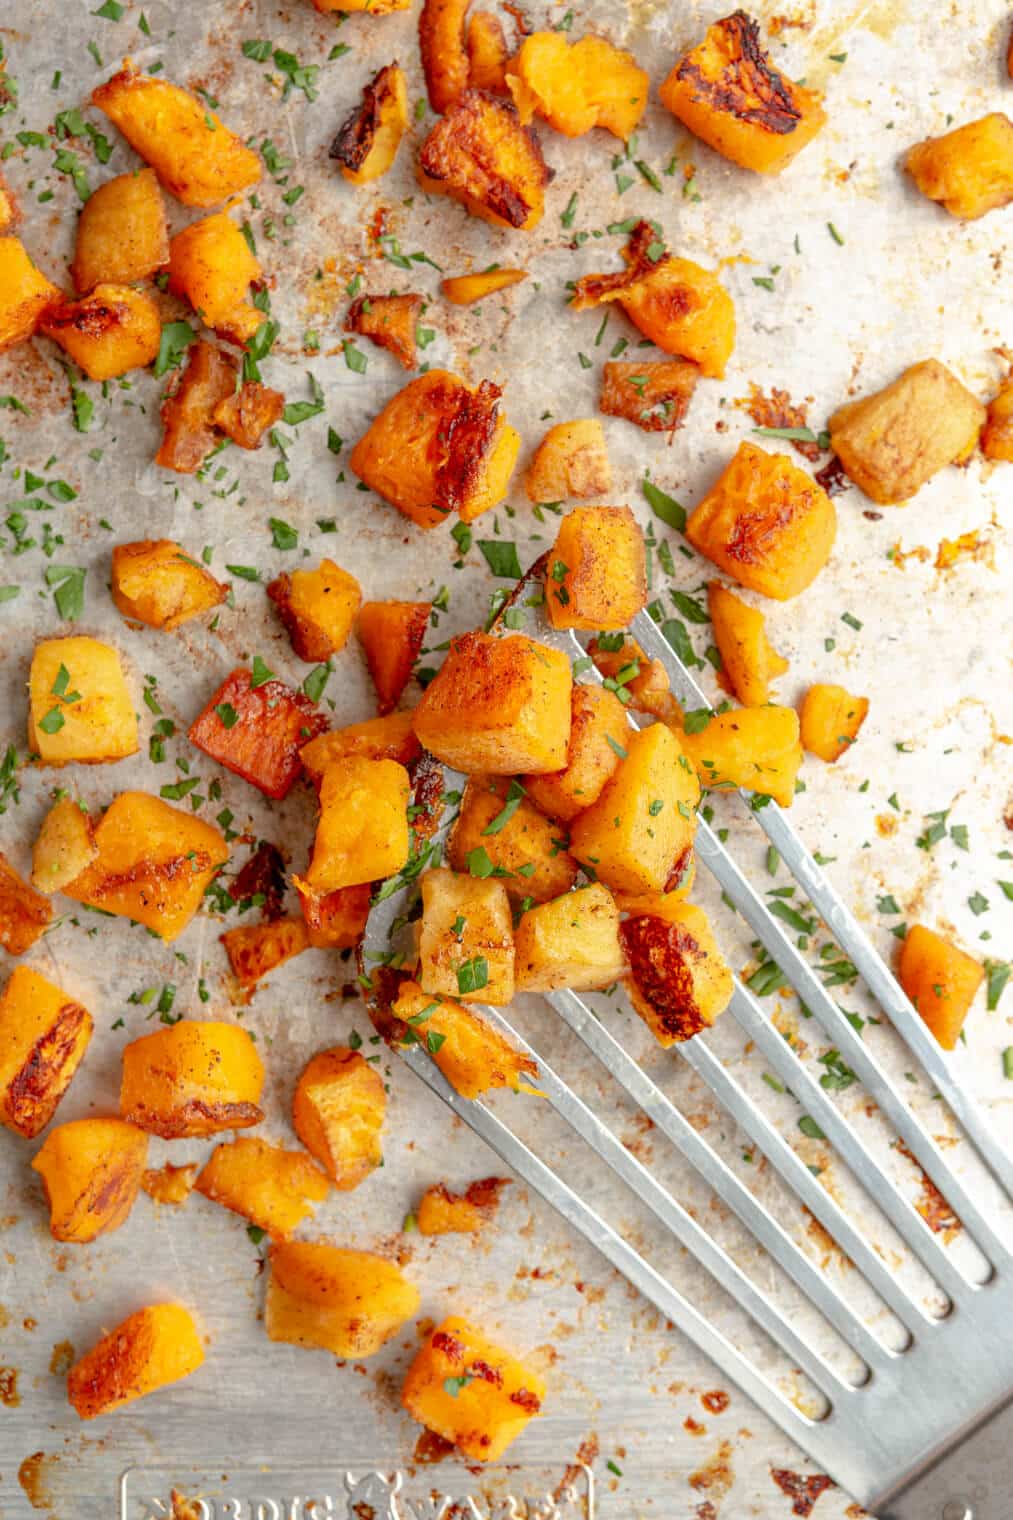 Roasted butternut squash garnished with fresh herbs on a sheet pan with a spatula serving some of the squash.